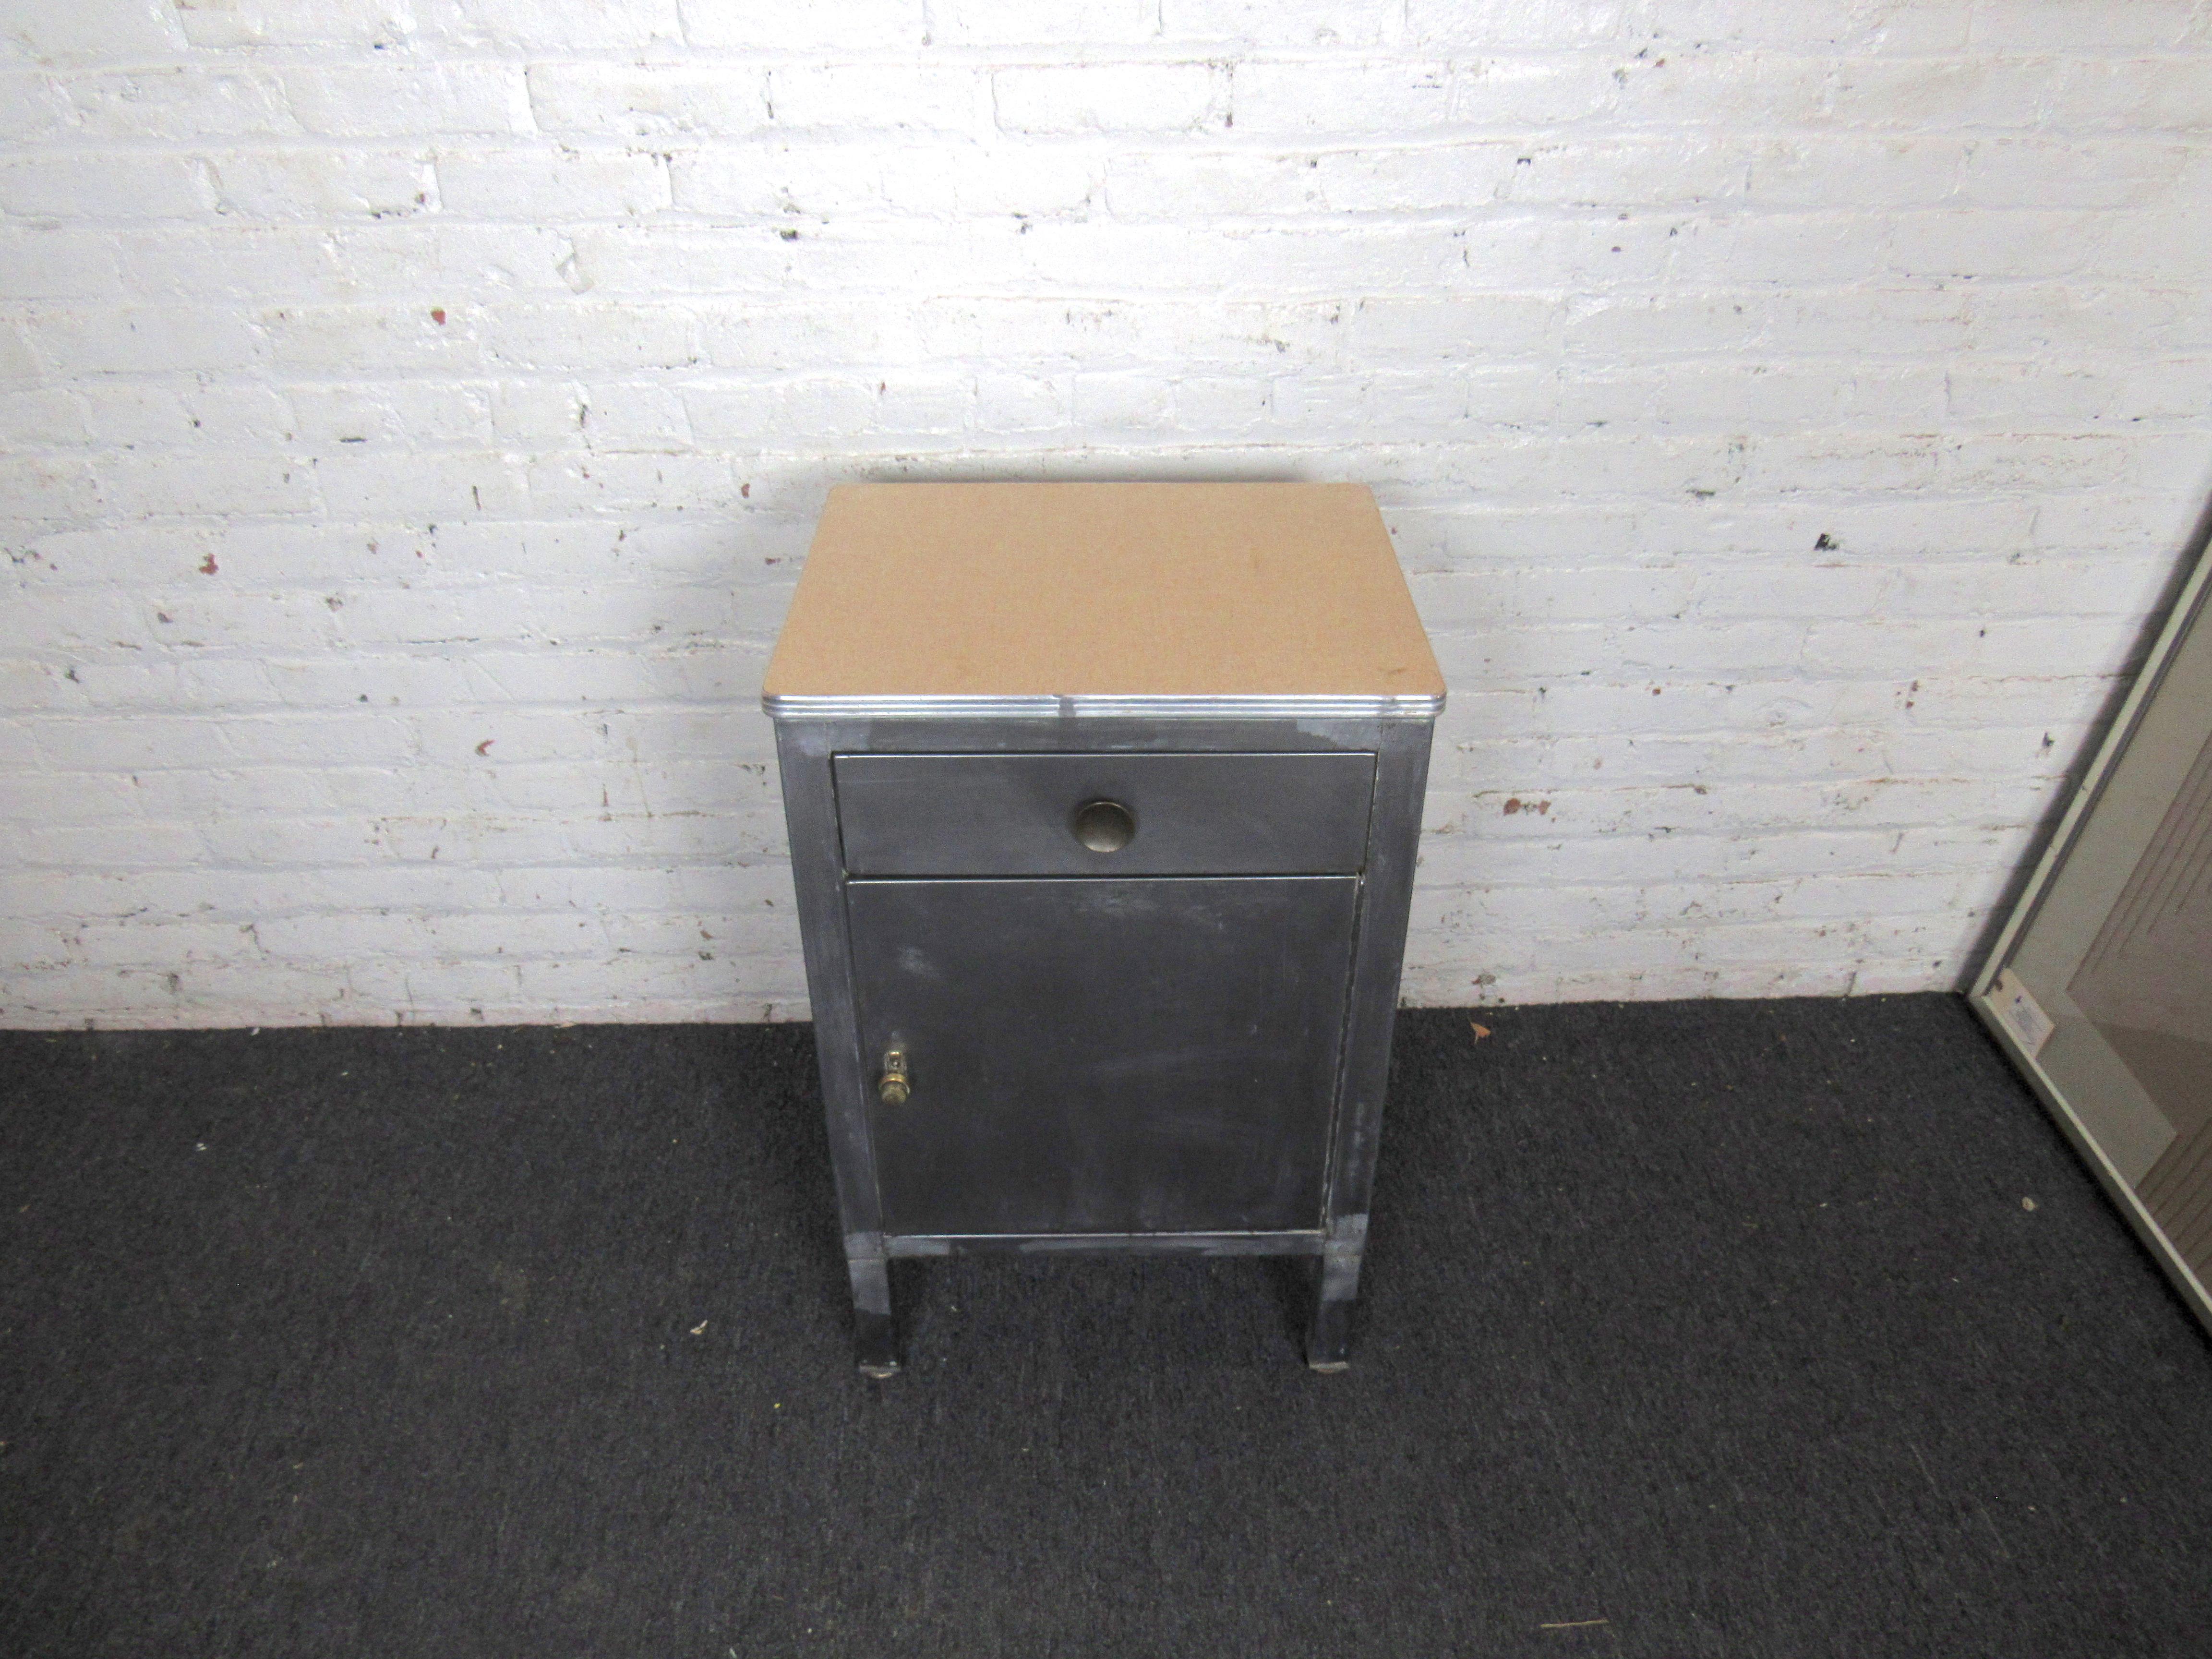 A small, compact and sturdy metal cabinet offering plenty of storage and industrial style. A push button opens the larger door revealing a shelf and large inner compartment, while a top drawer helps organize smaller items. Please confirm item